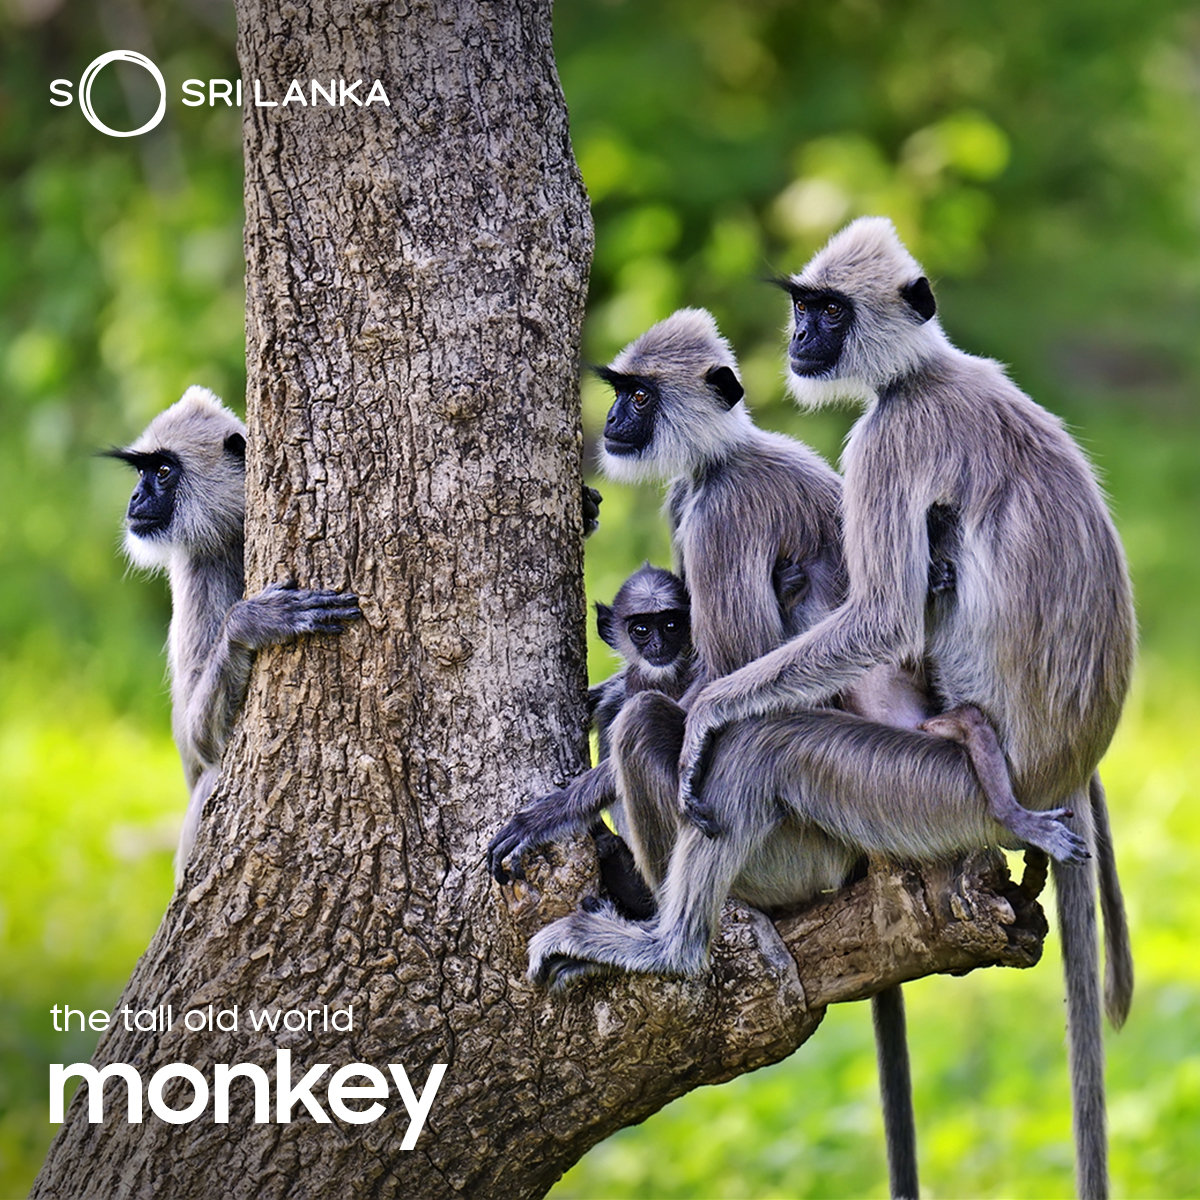 You'll find the Sri Lankan grey langur all over the Cultural Triangle, inquisitively peering at you from amidst the ruins.

#ColumbusTours #GreyLangur #WildlifeInSriLanka #SriLanka #SoSriLanka #ExploreSriLanka